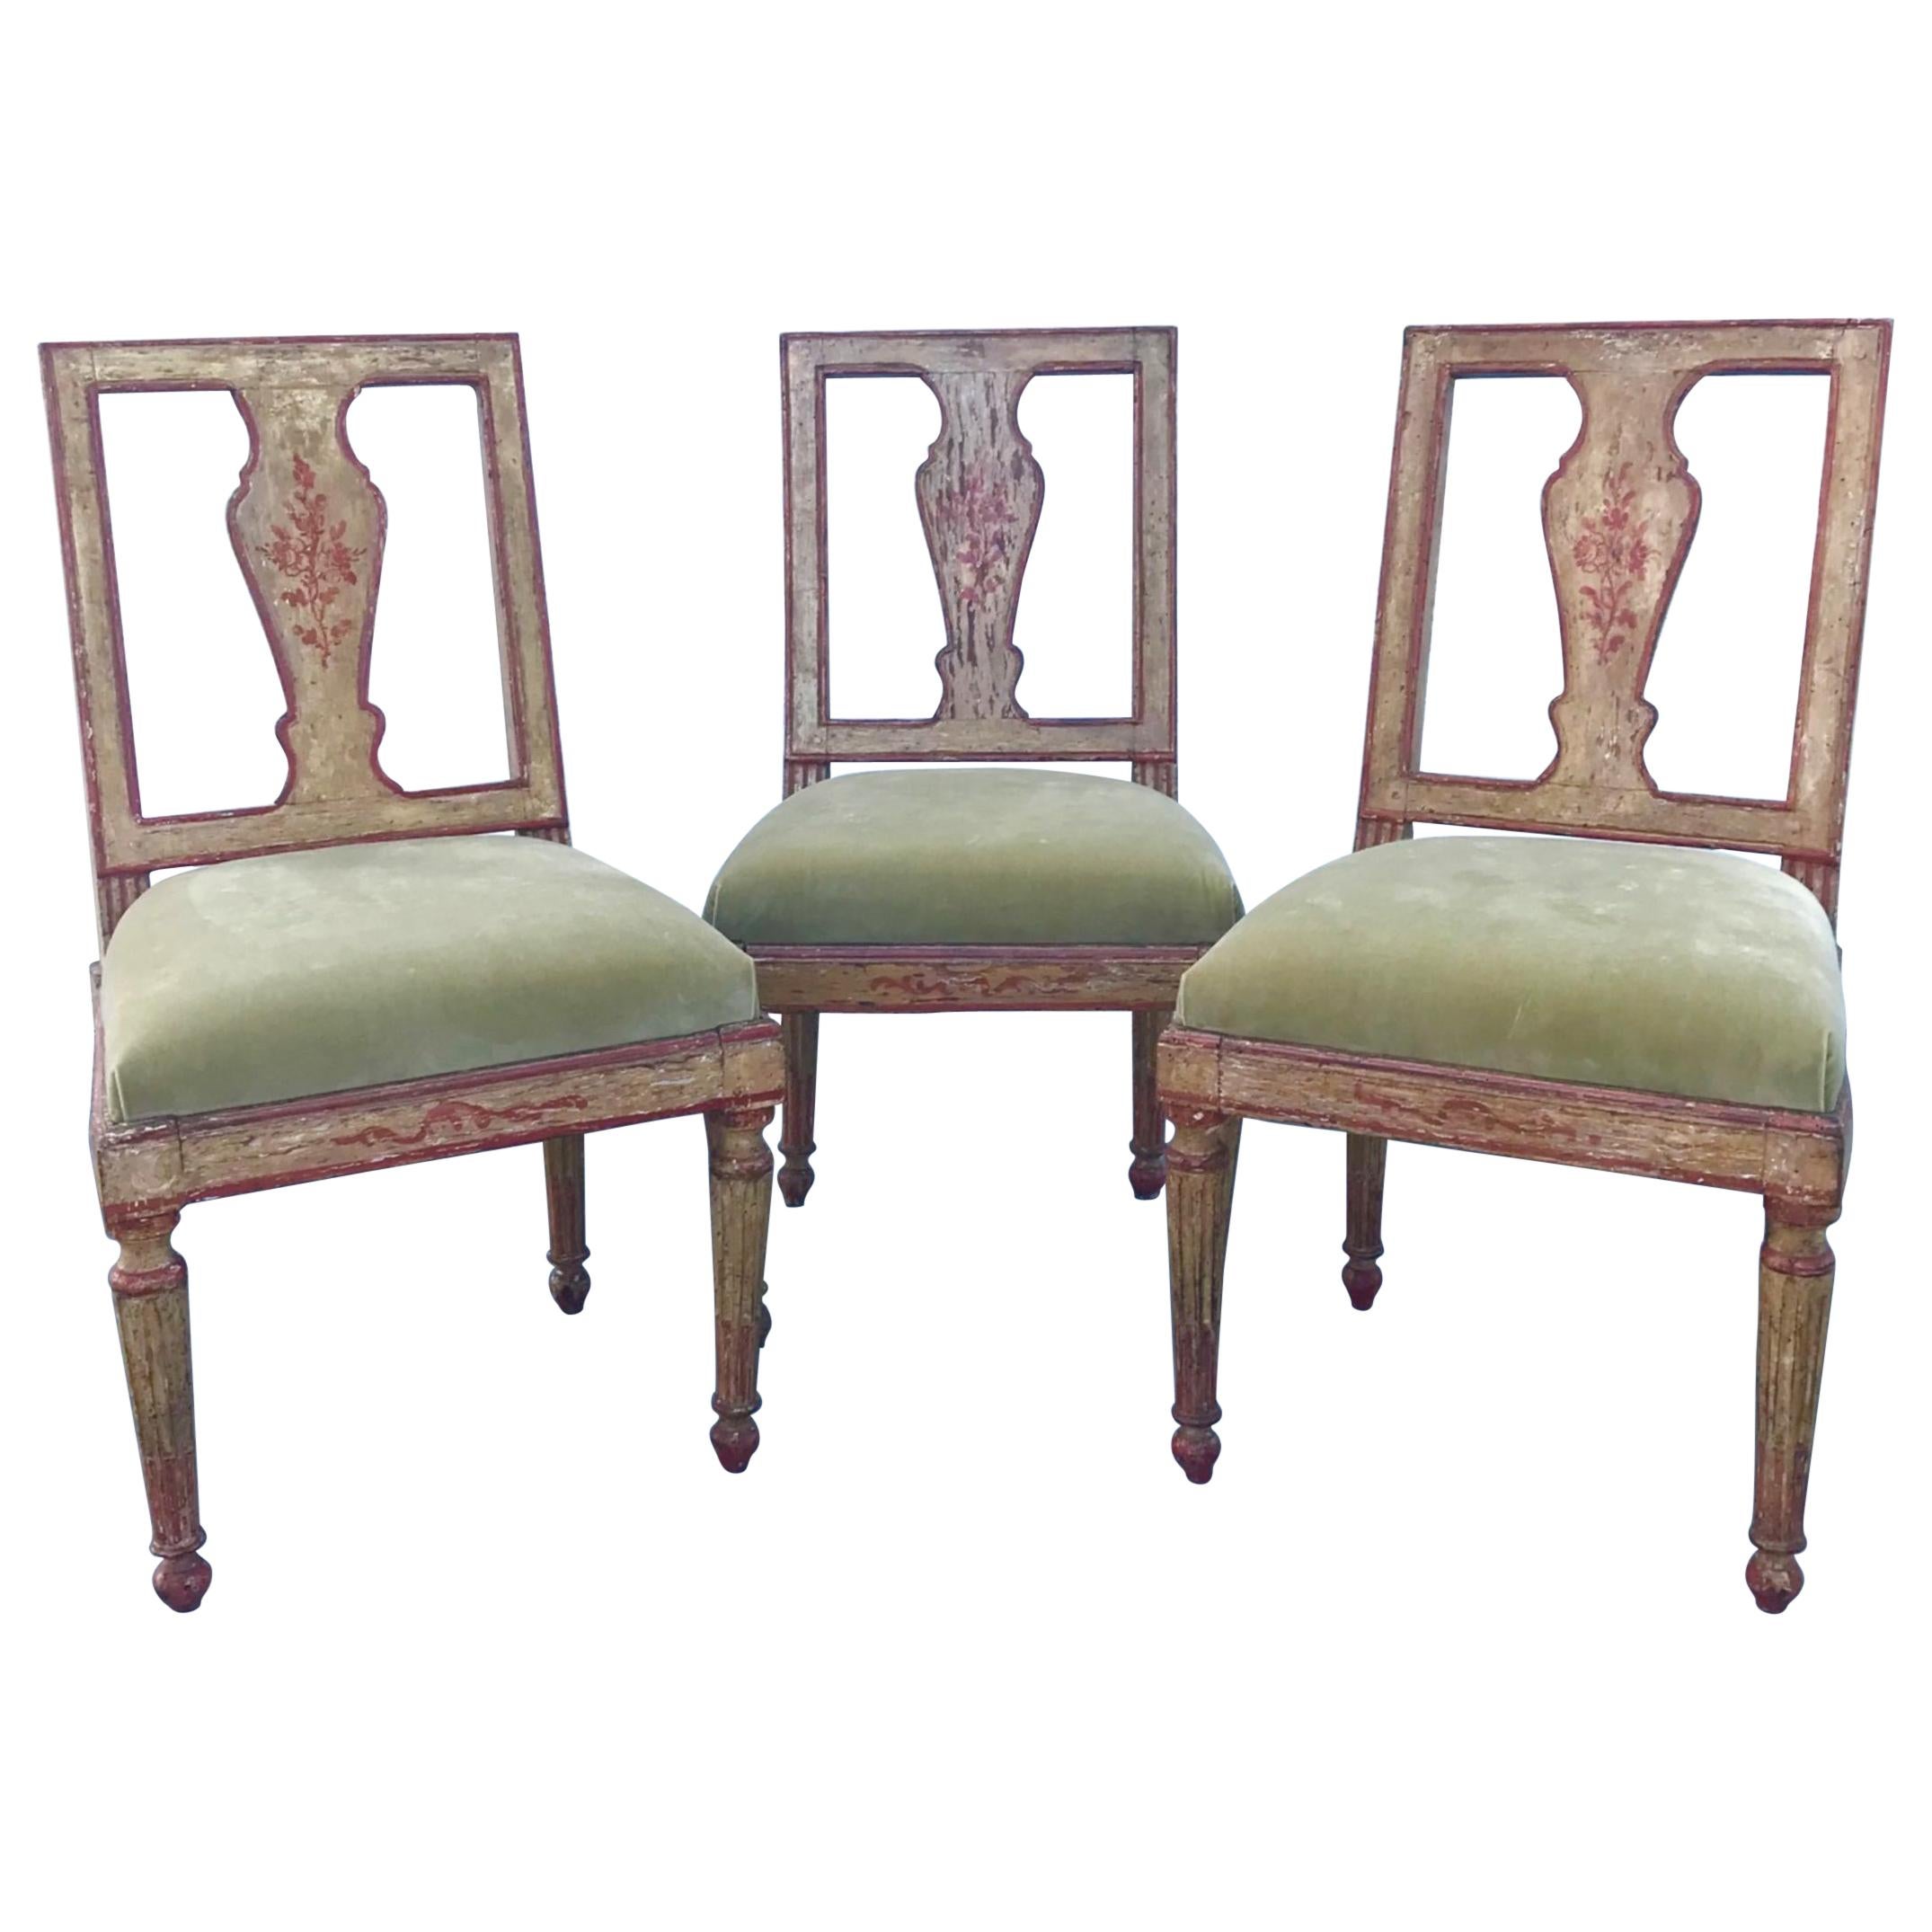 Suite of Three Italian Neoclassical Polychrome Painted Side Chairs, circa 1780 For Sale